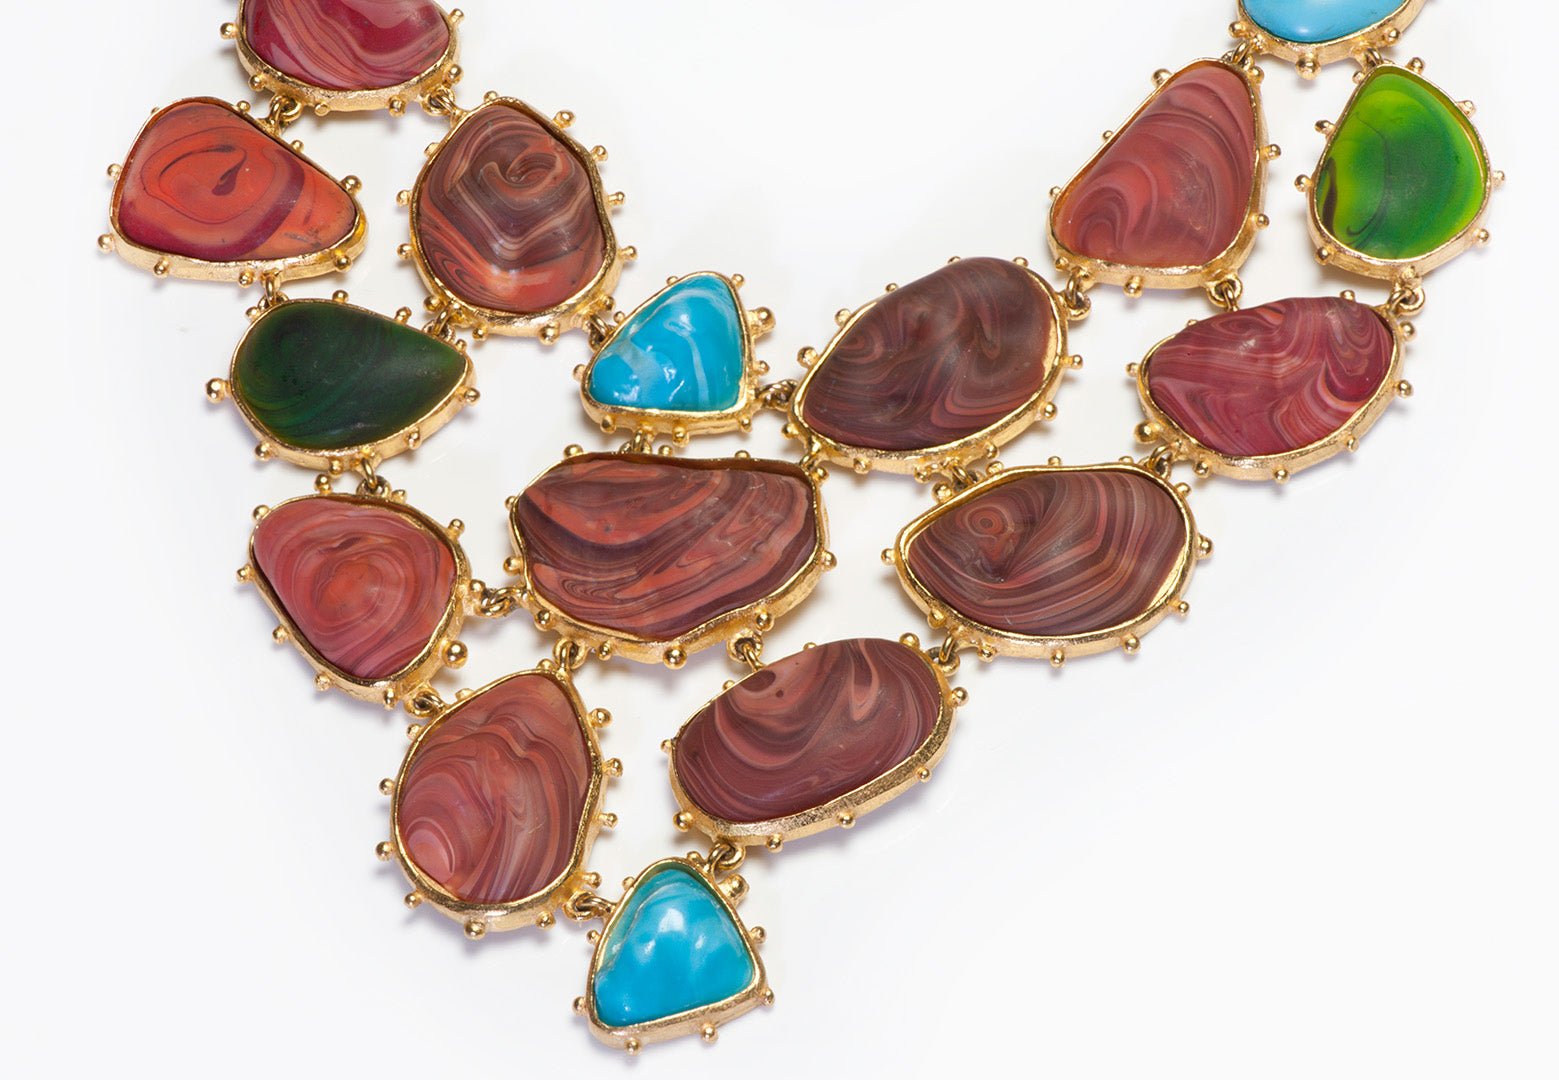 Vintage Christian Lacroix Couture Blue Glass Red Green Resin Bib Necklace